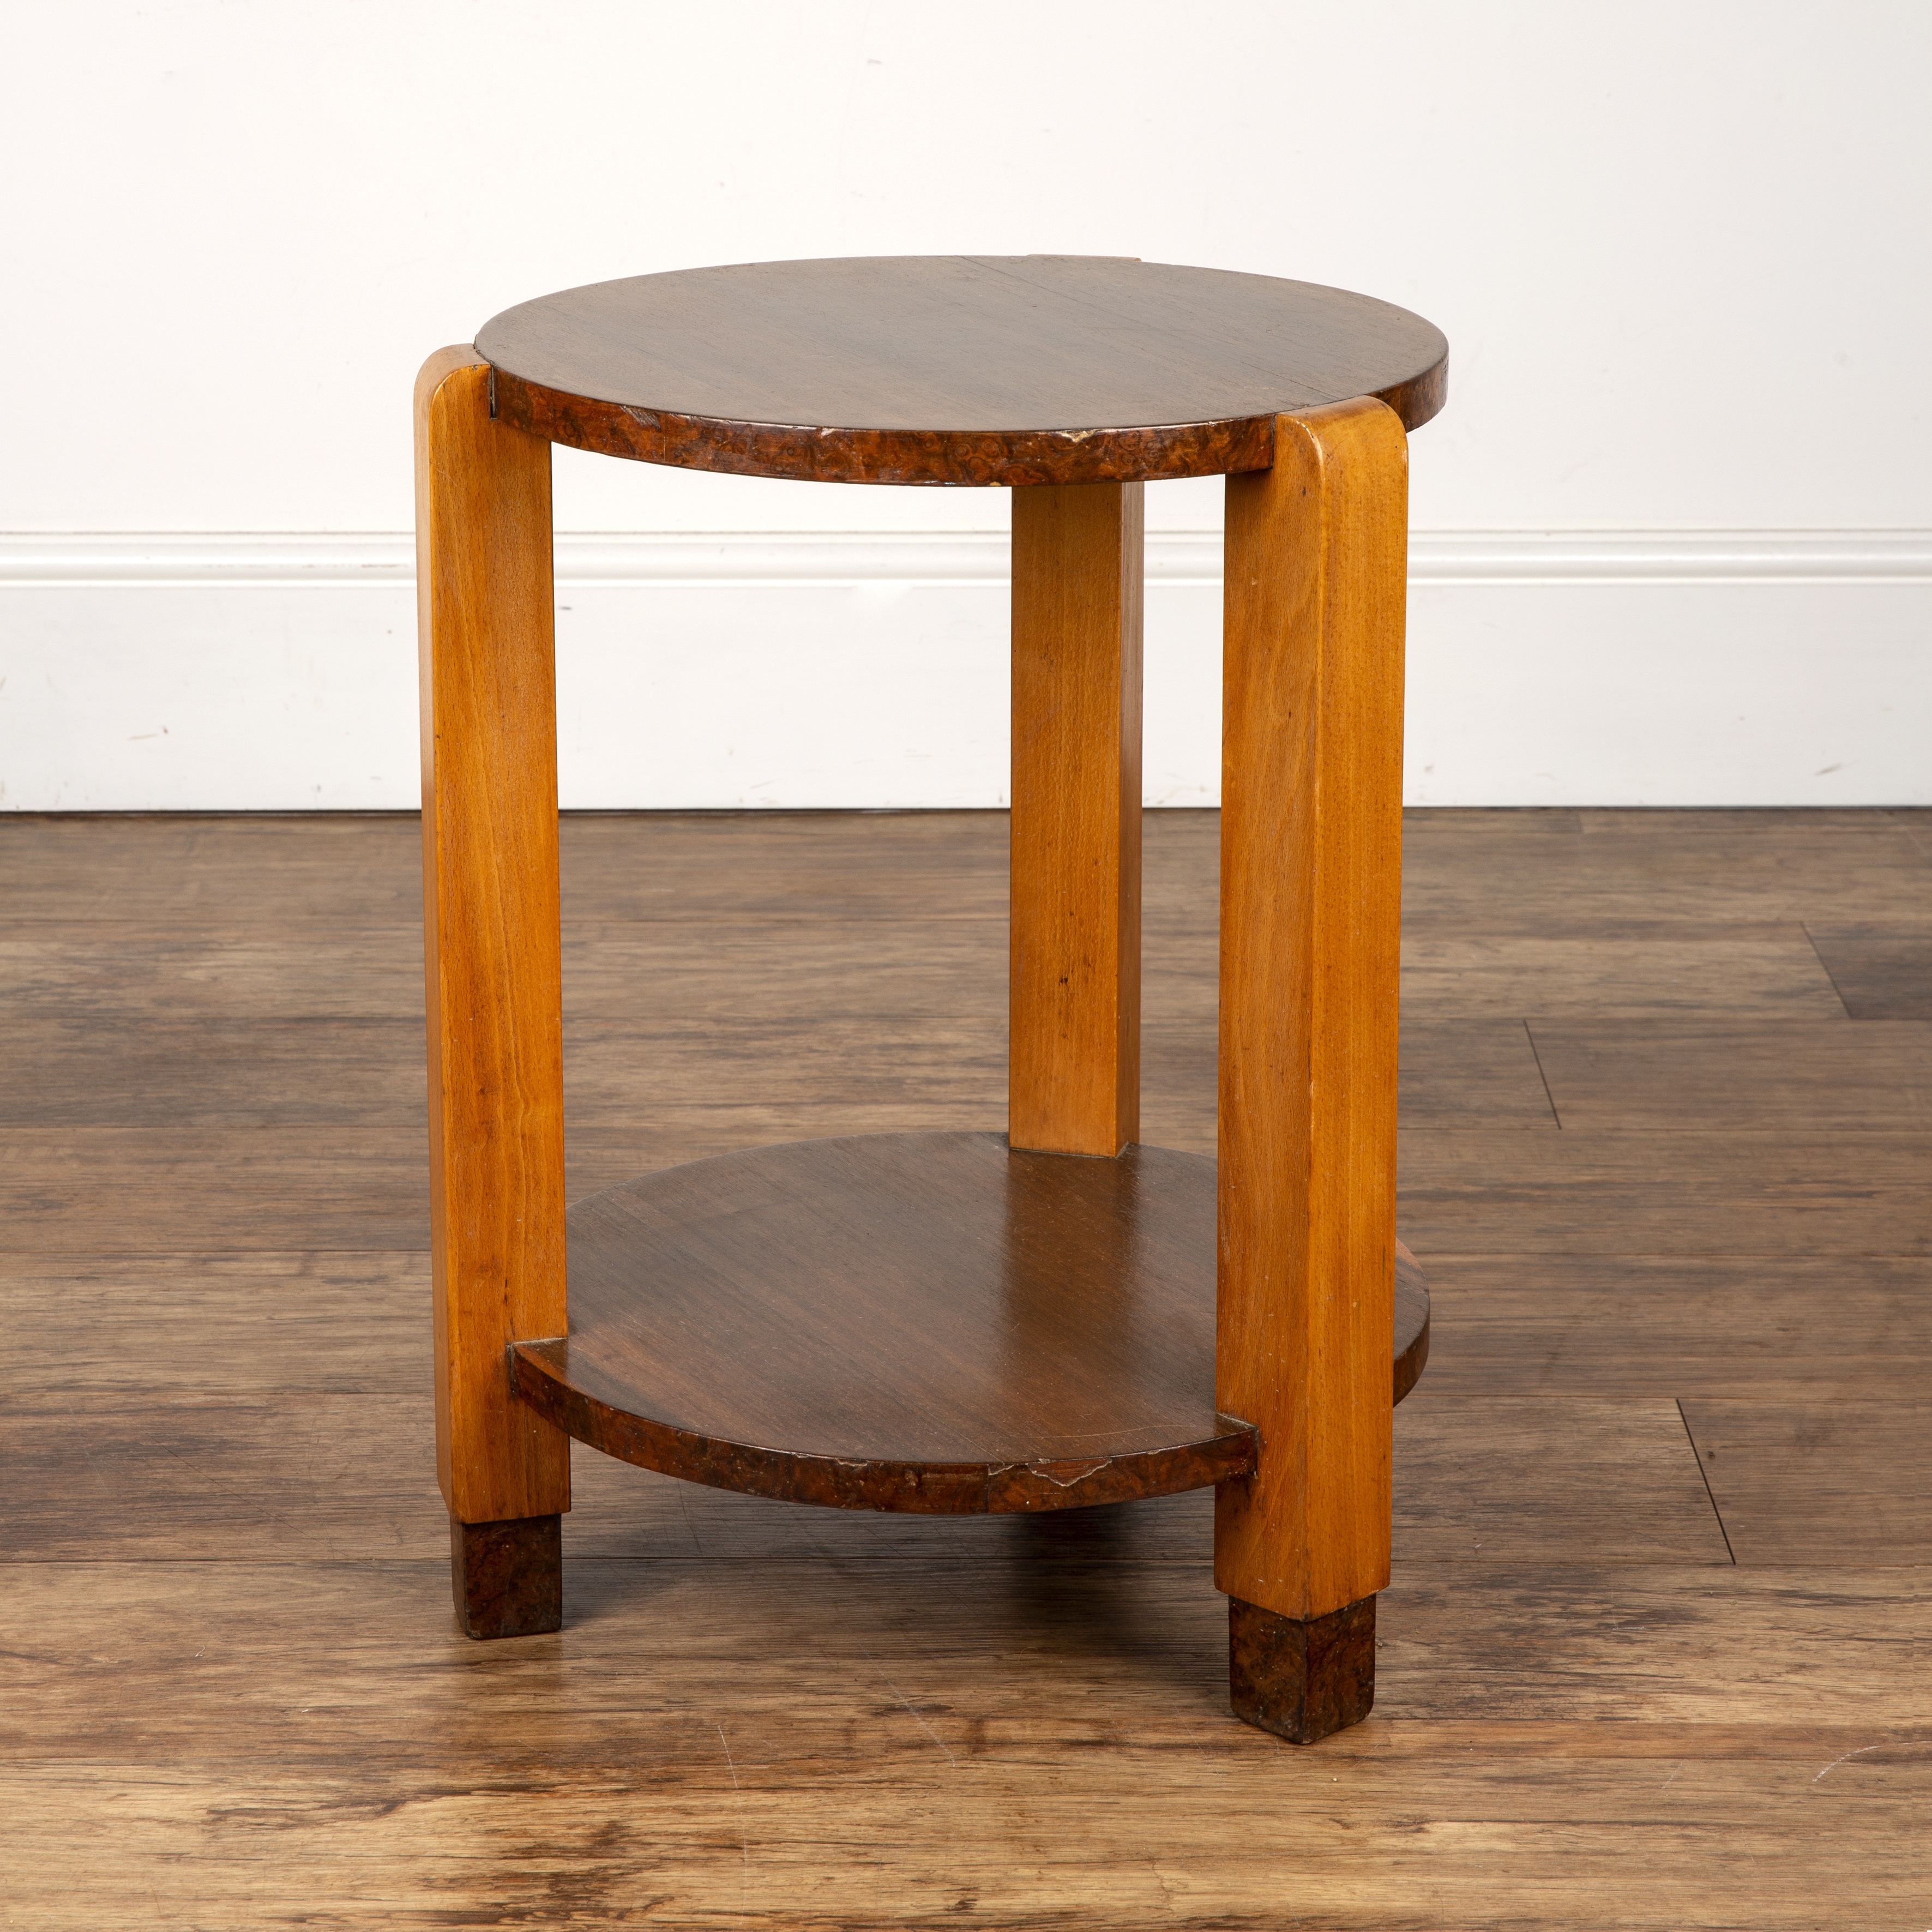 Art Deco beech and walnut veneered table, with circular top, the top surface measures 37cm wide - Image 4 of 5